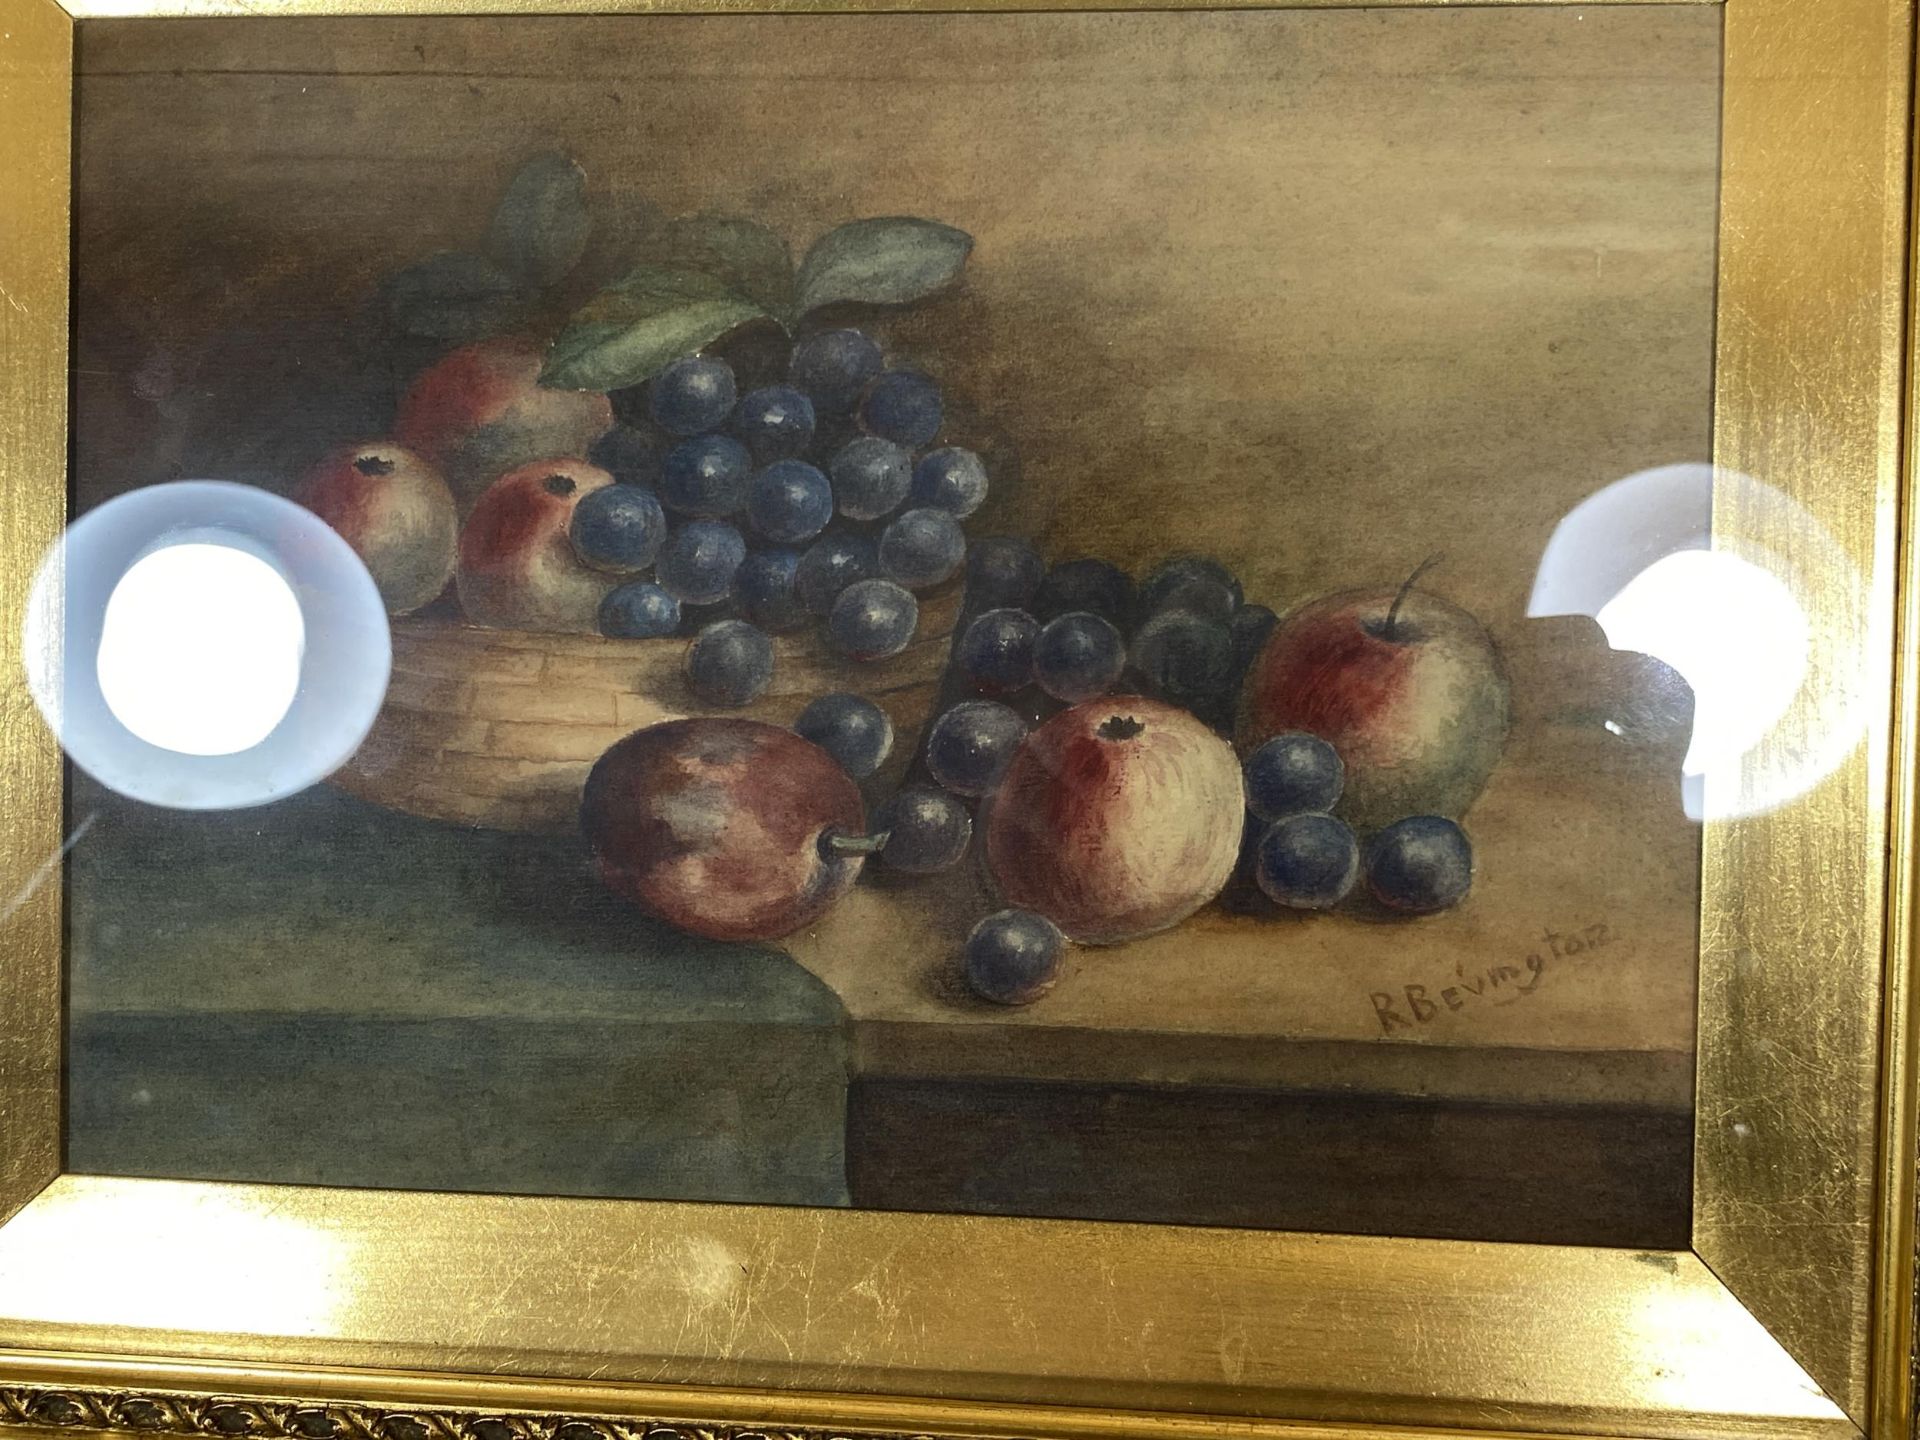 A PAIR OF RAYMOND BEVINGTON, (ROYAL WORCESTER ARTIST), ORIGINAL WATERCOLOURS IN DECORATIVE GILT - Image 4 of 8